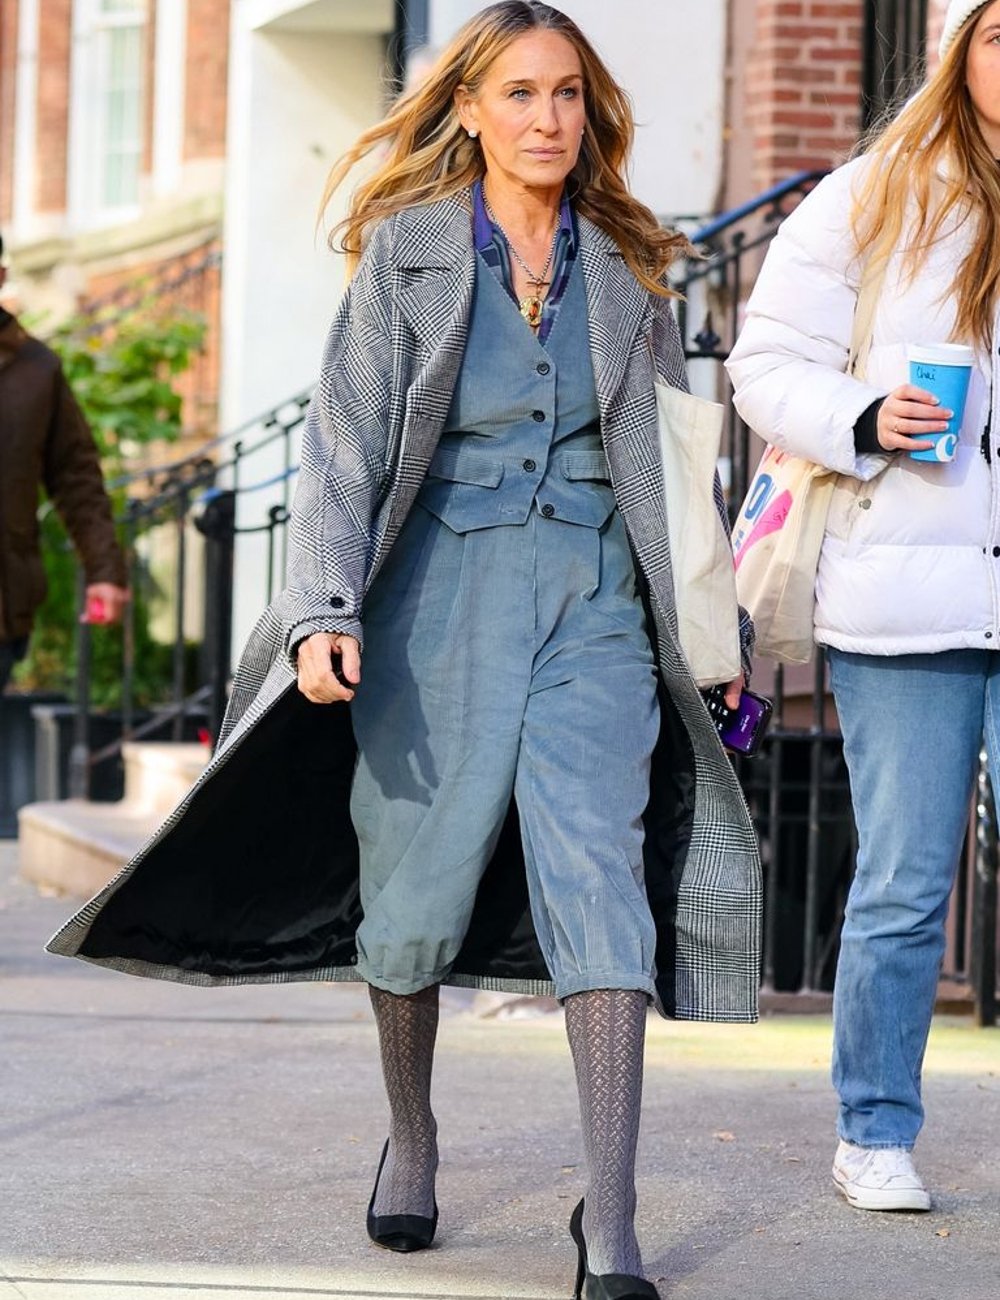 Carrie Bradshaw - colete - Carrie Bradshaw - inverno - street style - https://stealthelook.com.br